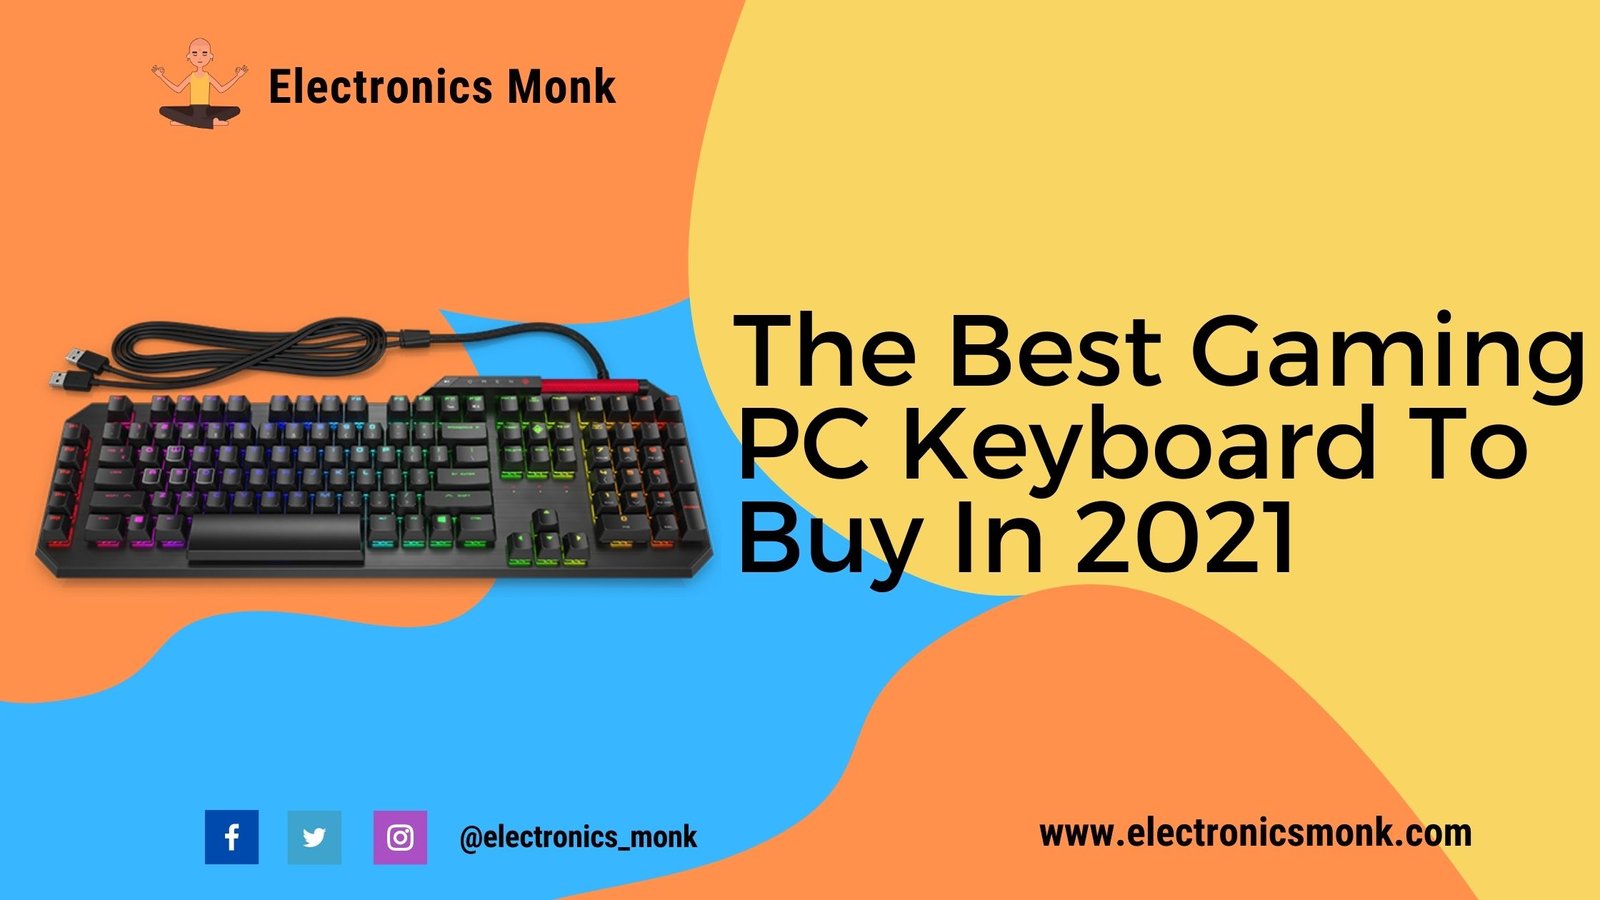 The Best Gaming PC Keyboard To Buy In 2021